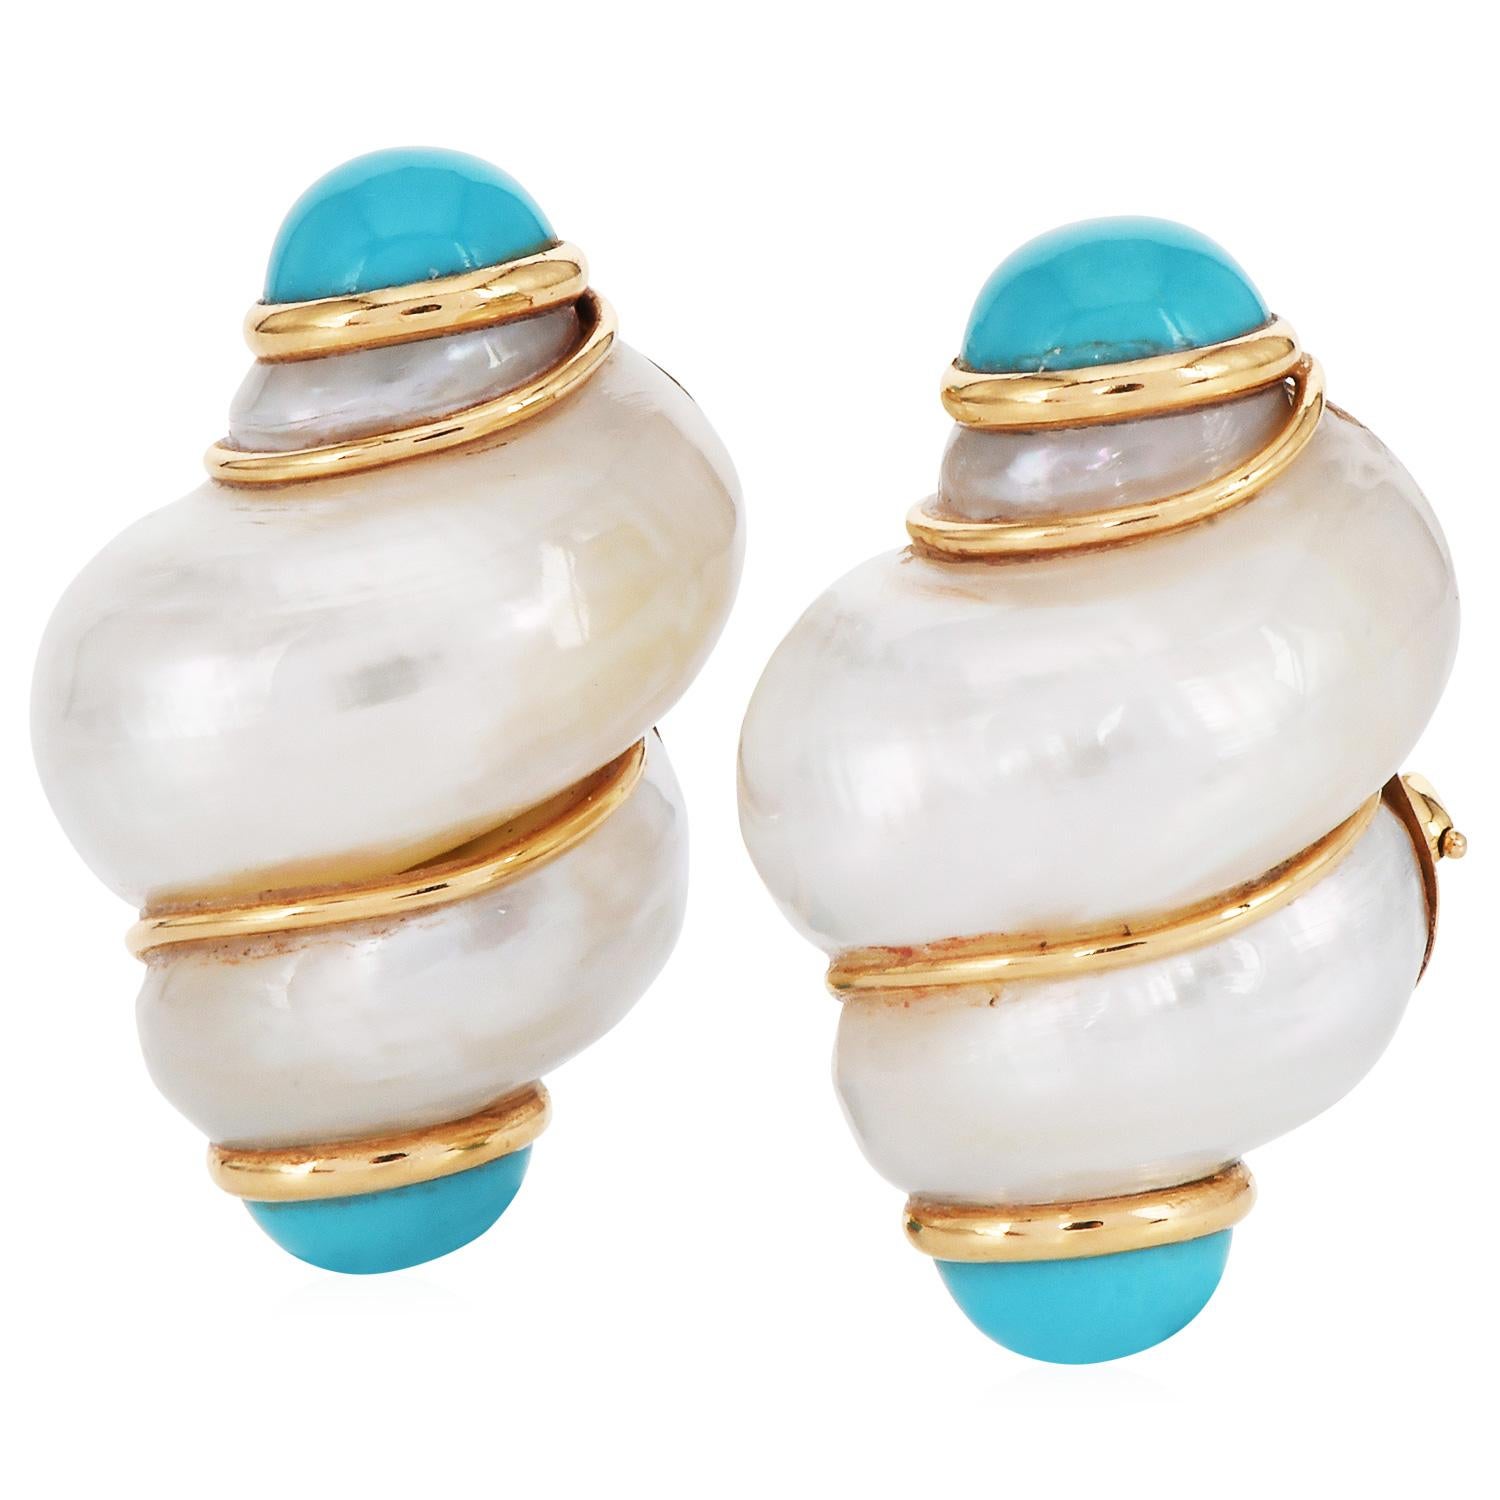 Vintage retro Shell Motif gold rap design clip-on earrings for all sea lovers!

The brand MAZ is characterized by its high-quality shell-style designs.

Crafted in 14 K Yellow gold, displays (4) cabochon oval-cut genuine Turquoise weighing approx.